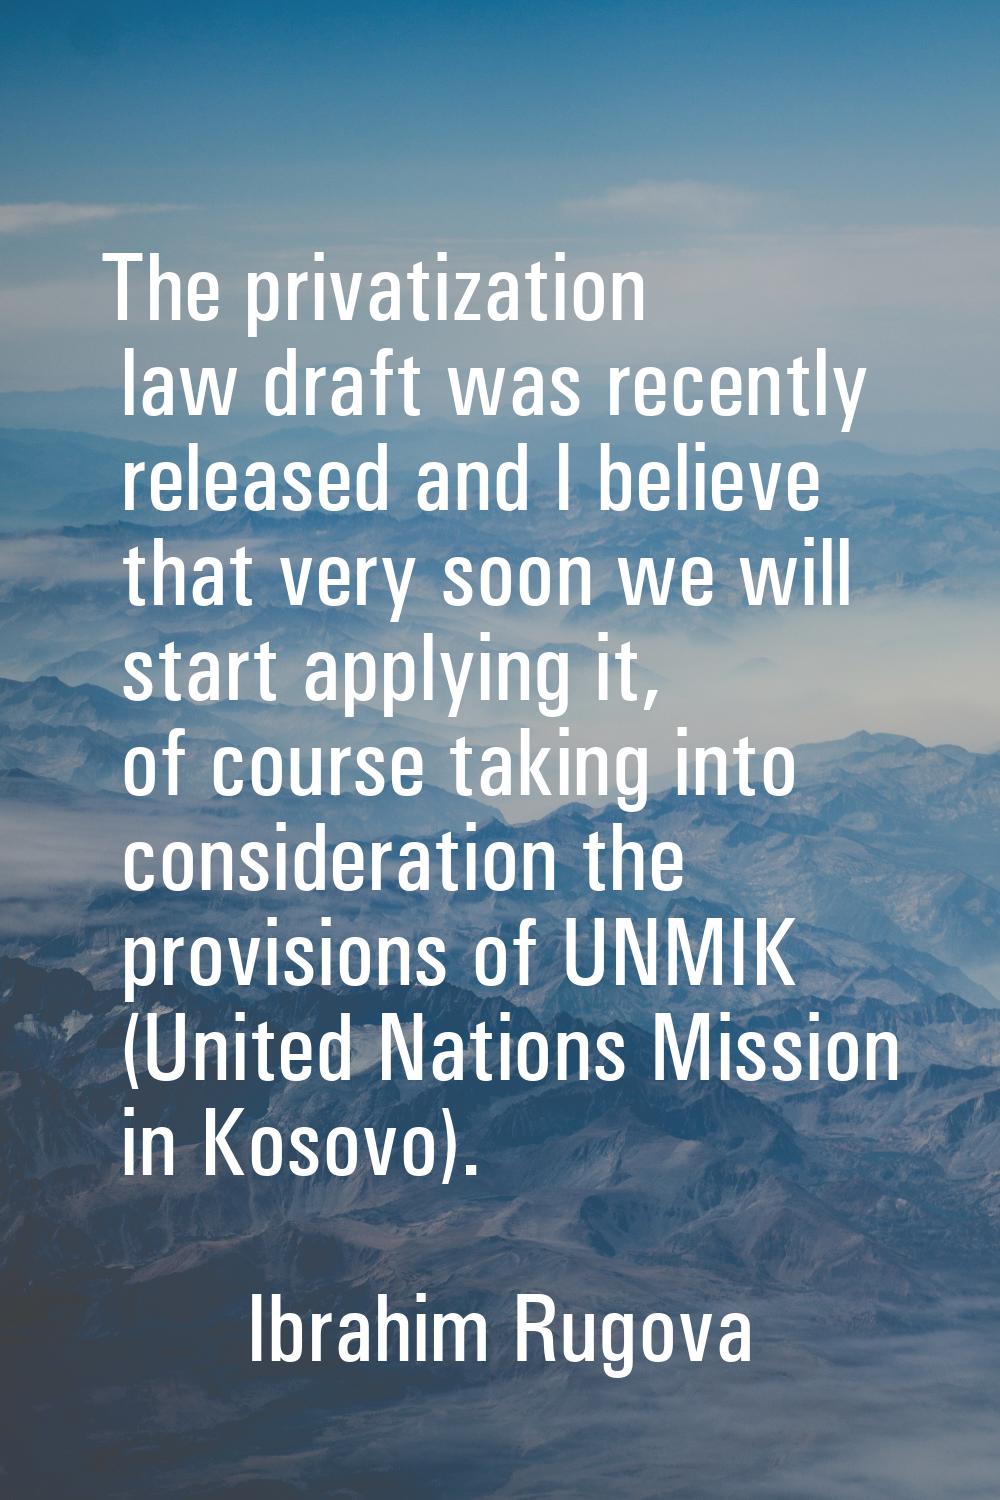 The privatization law draft was recently released and I believe that very soon we will start applyi